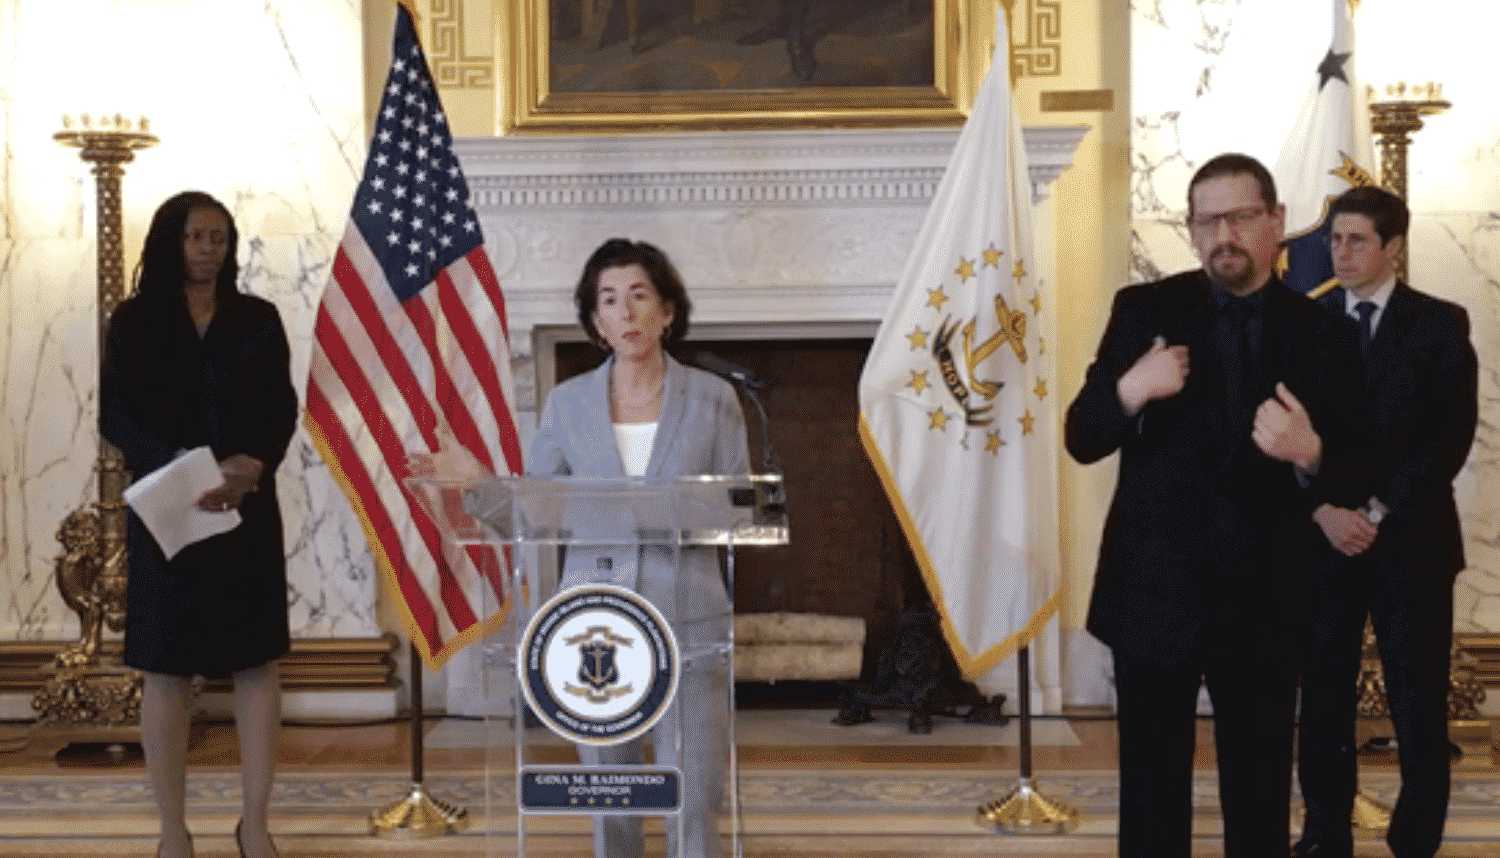 Gov. Gina Raimondo held a press conference March 31, announcing four new COVID-19 deaths and closing state parks and beaches.